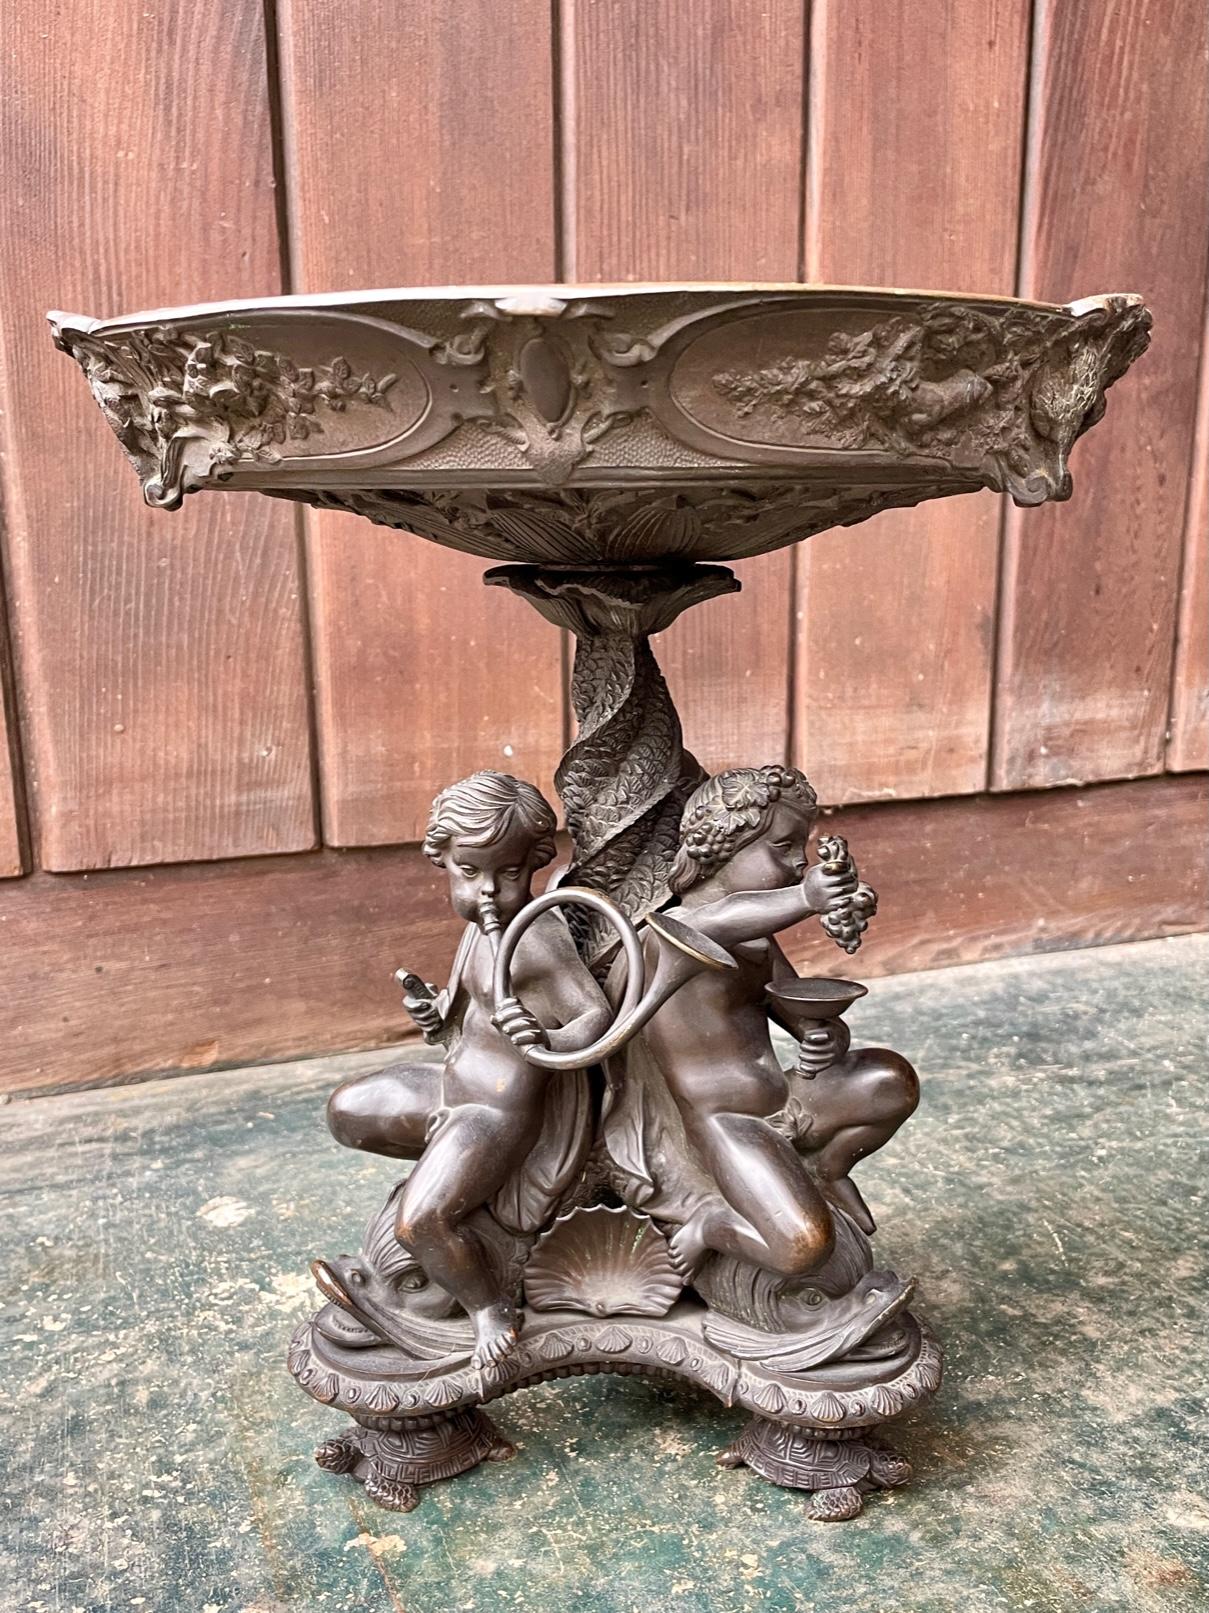 An unpolished patinated French 19th century cast bronze Tazza bowl supported by three seated cherubs in fine details, on a tripod of sea creatures; fish and turtles. Very heavy. Procured from a fine Washington DC Estate. No makers markings found on